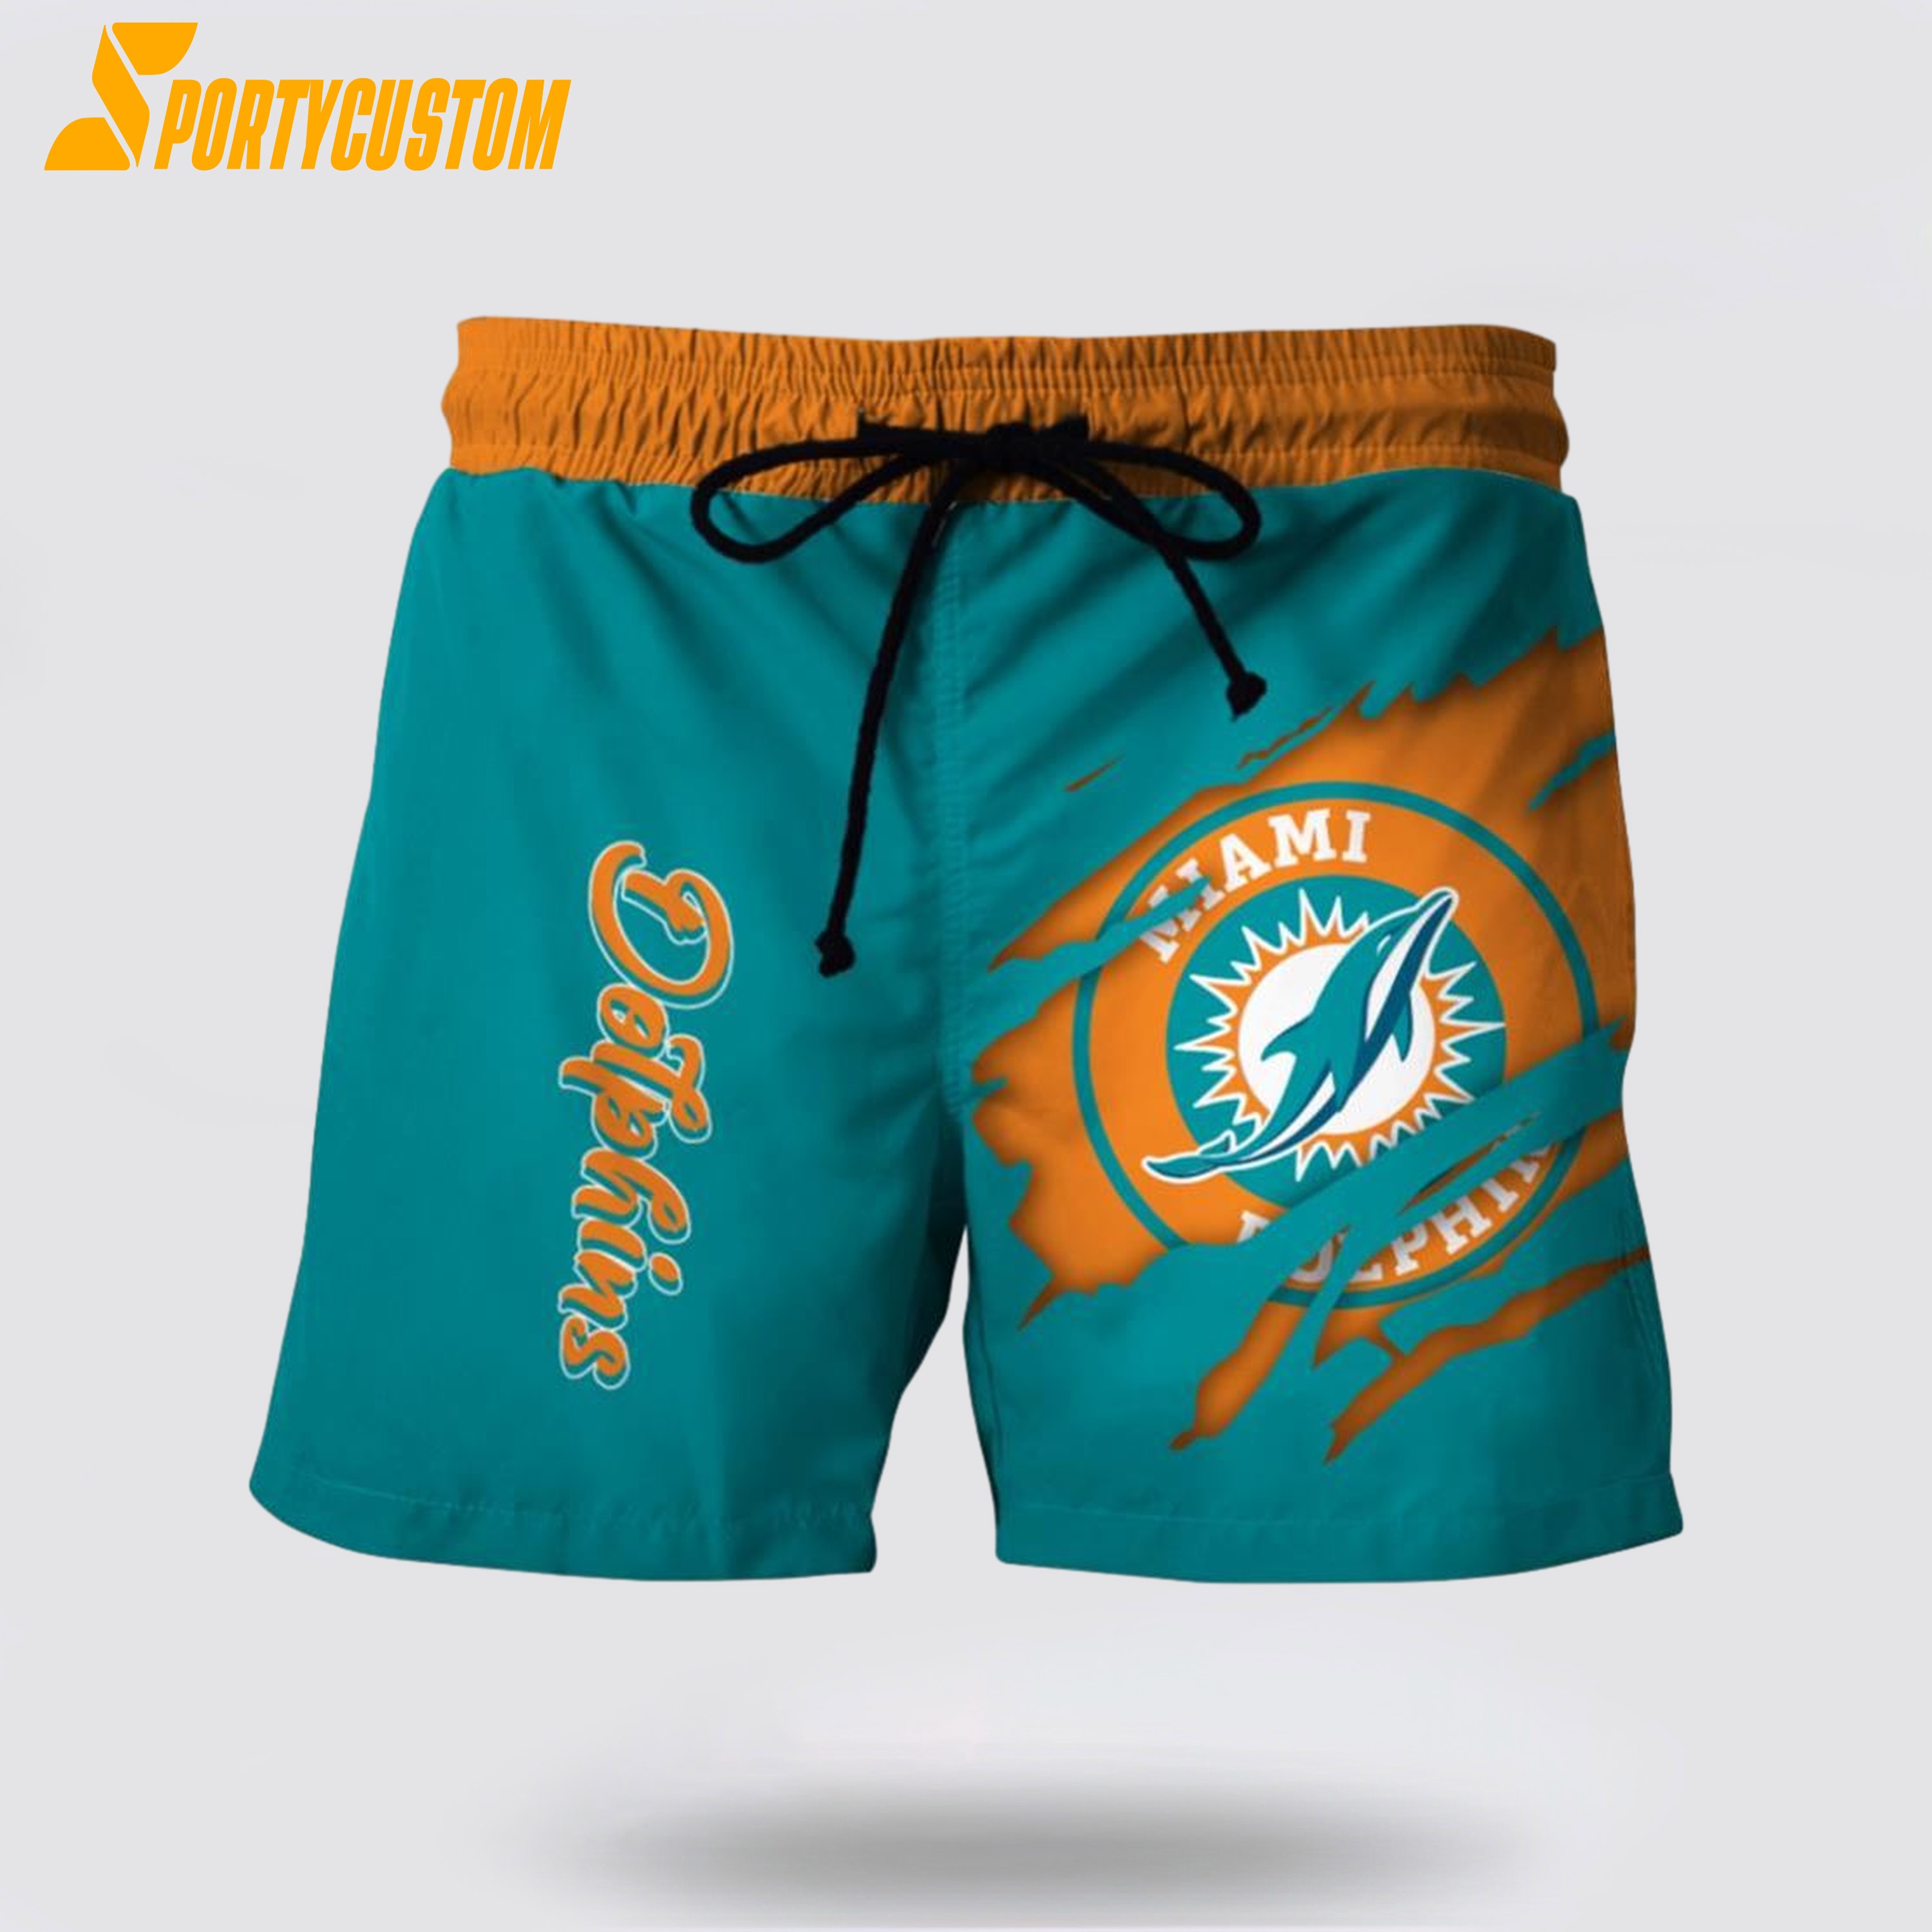 Miami Dolphins Shop - Miami Dolphins Mens Nfl Beach Board Shorts For Football Fans